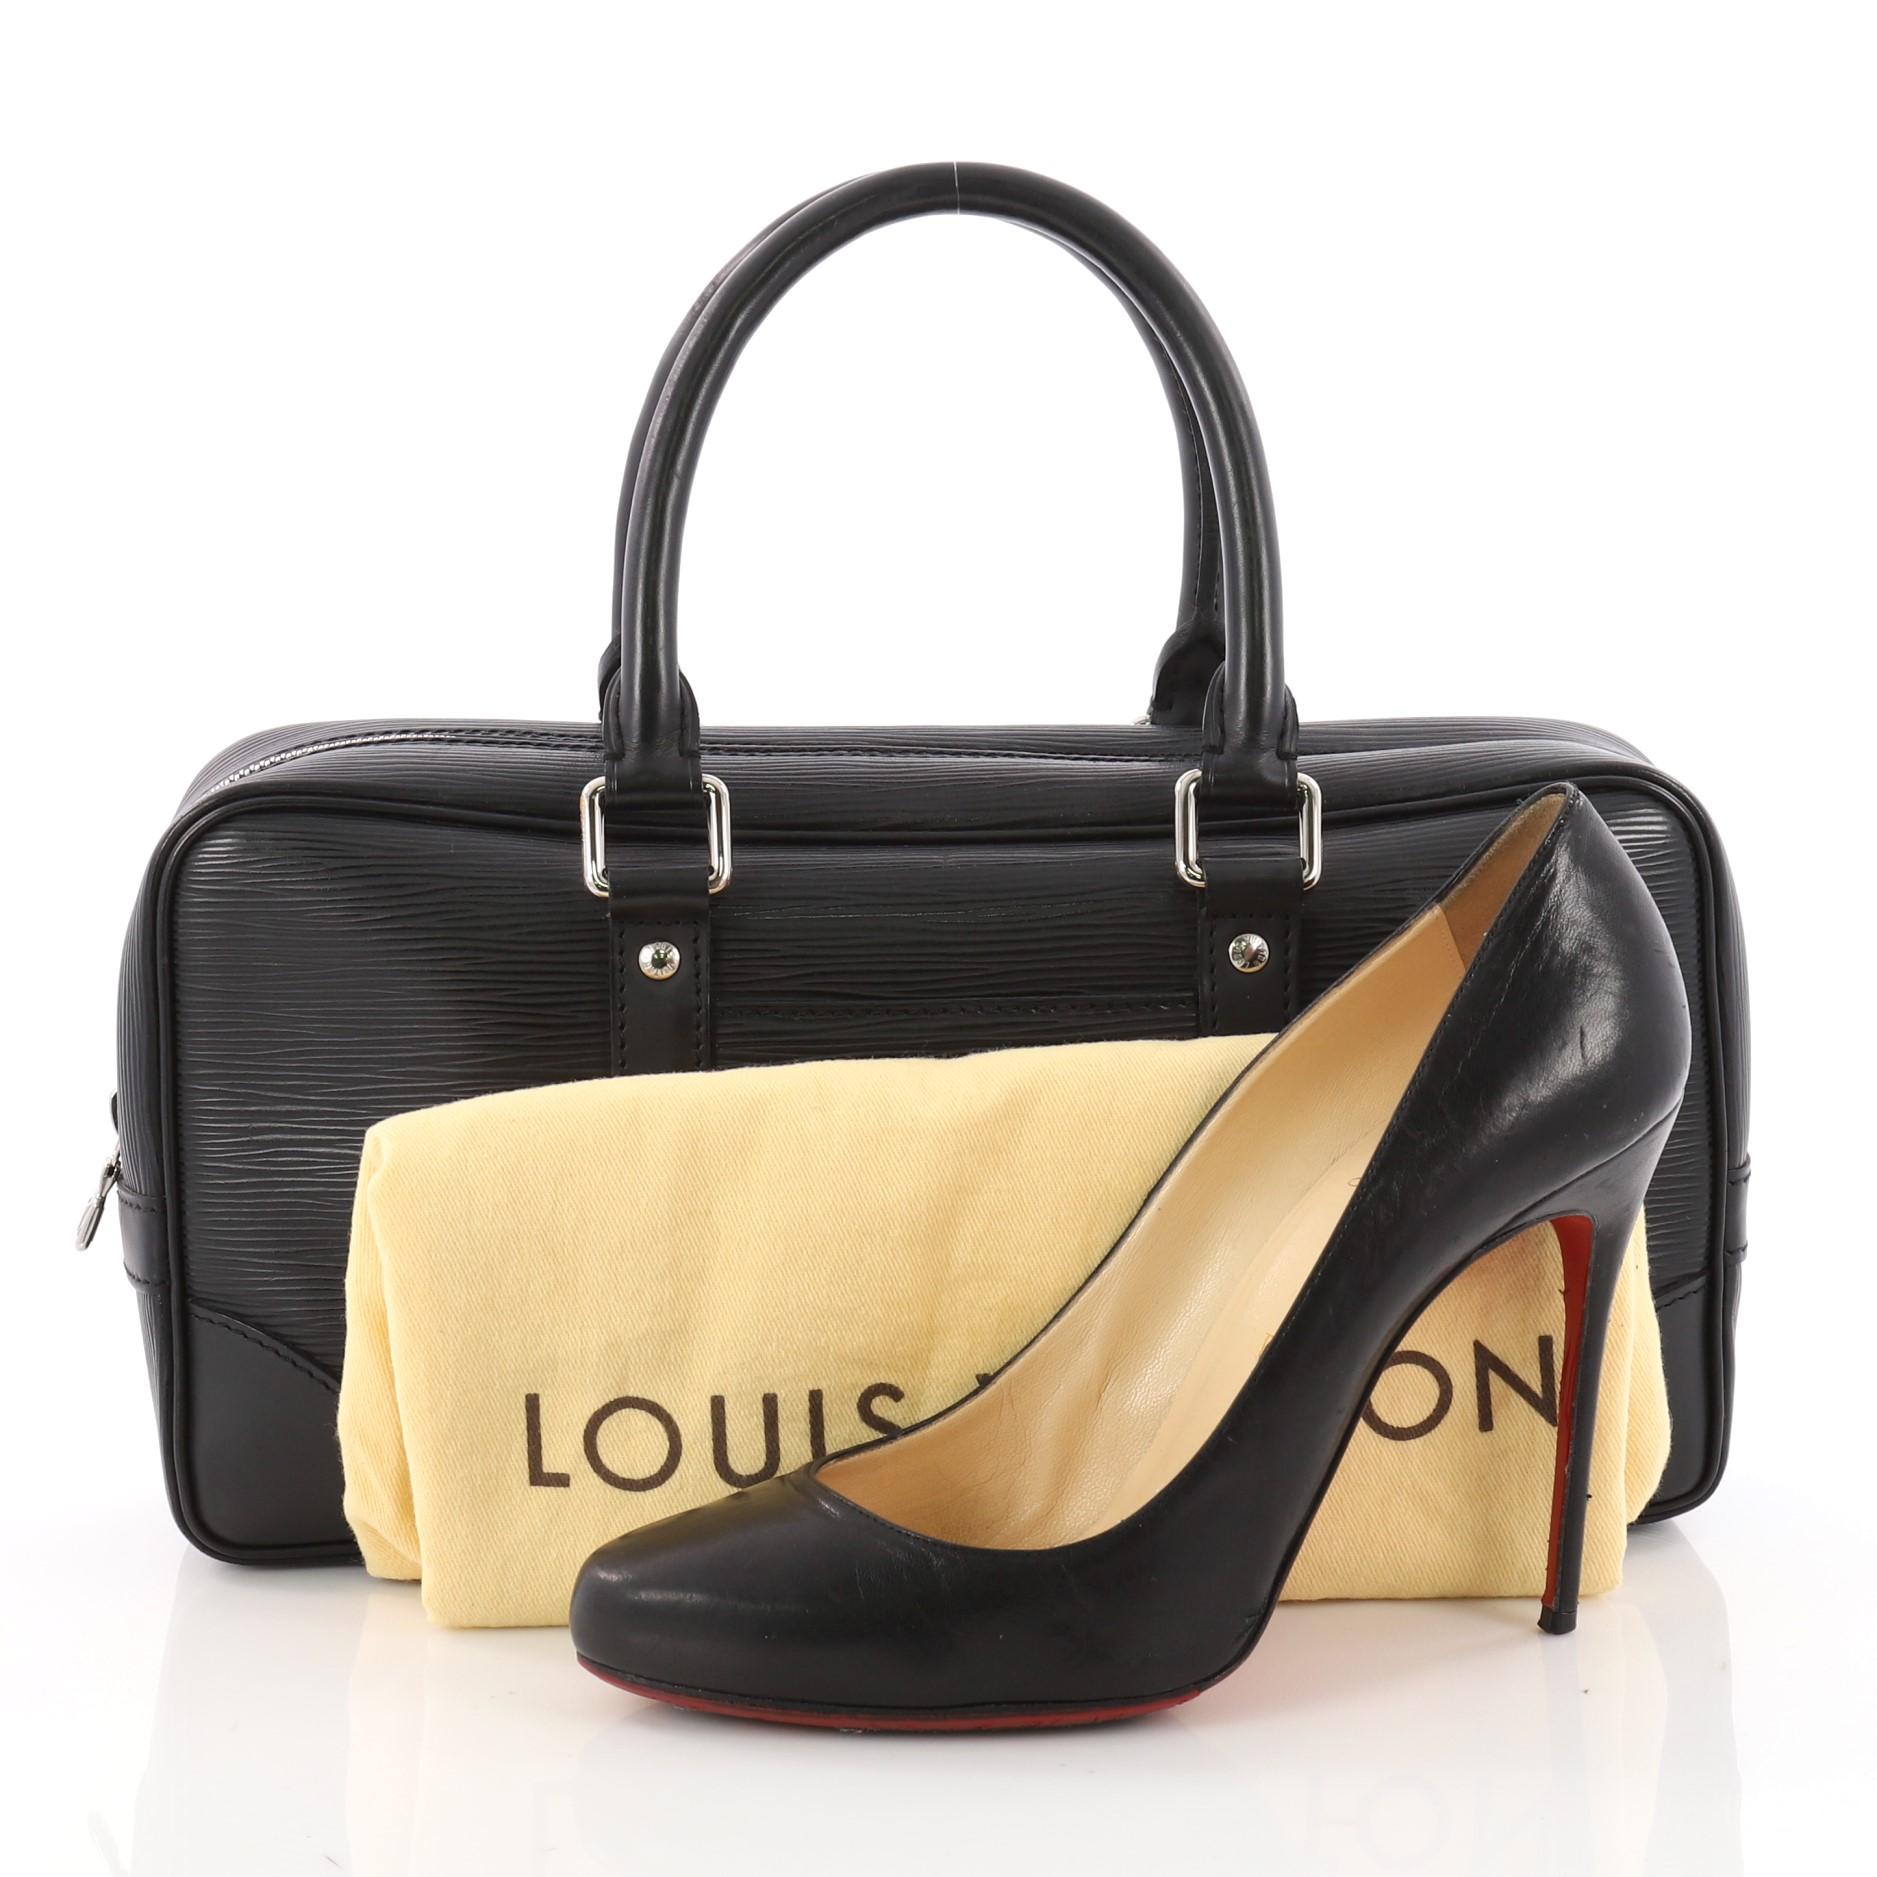 This authentic Louis Vuitton Vivienne Handbag Epi Leather East West is for an accent of luxury and style. Crafted in black epi leather, this bag features dual-rolled leather handles, exterior slip pocket and silver-tone hardware accents. It opens to